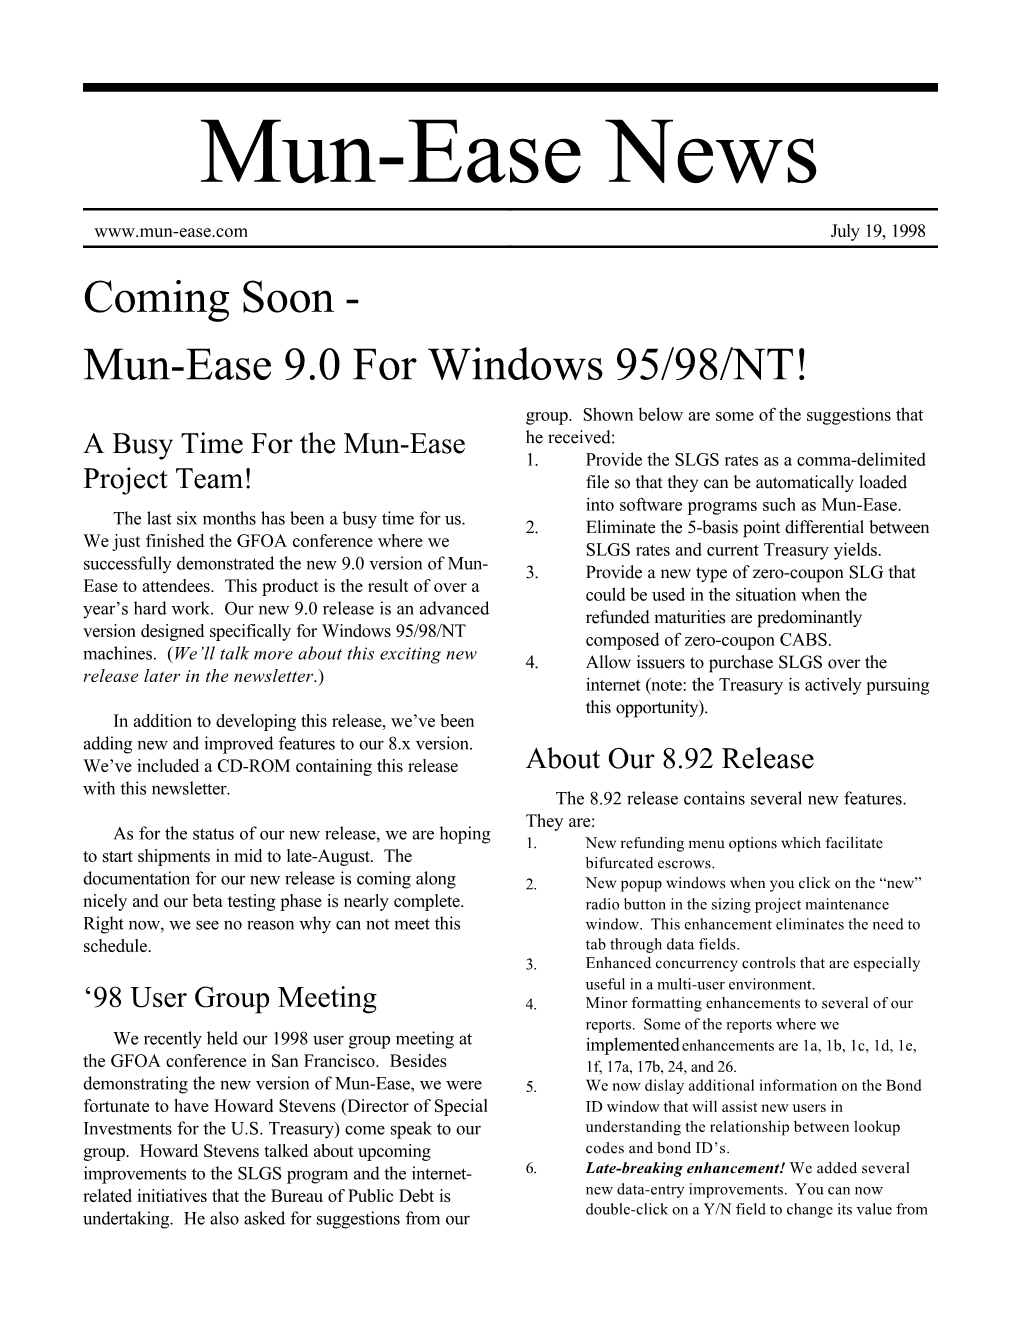 Mun-Ease News July 19, 1998 Coming Soon - Mun-Ease 9.0 for Windows 95/98/NT! Group